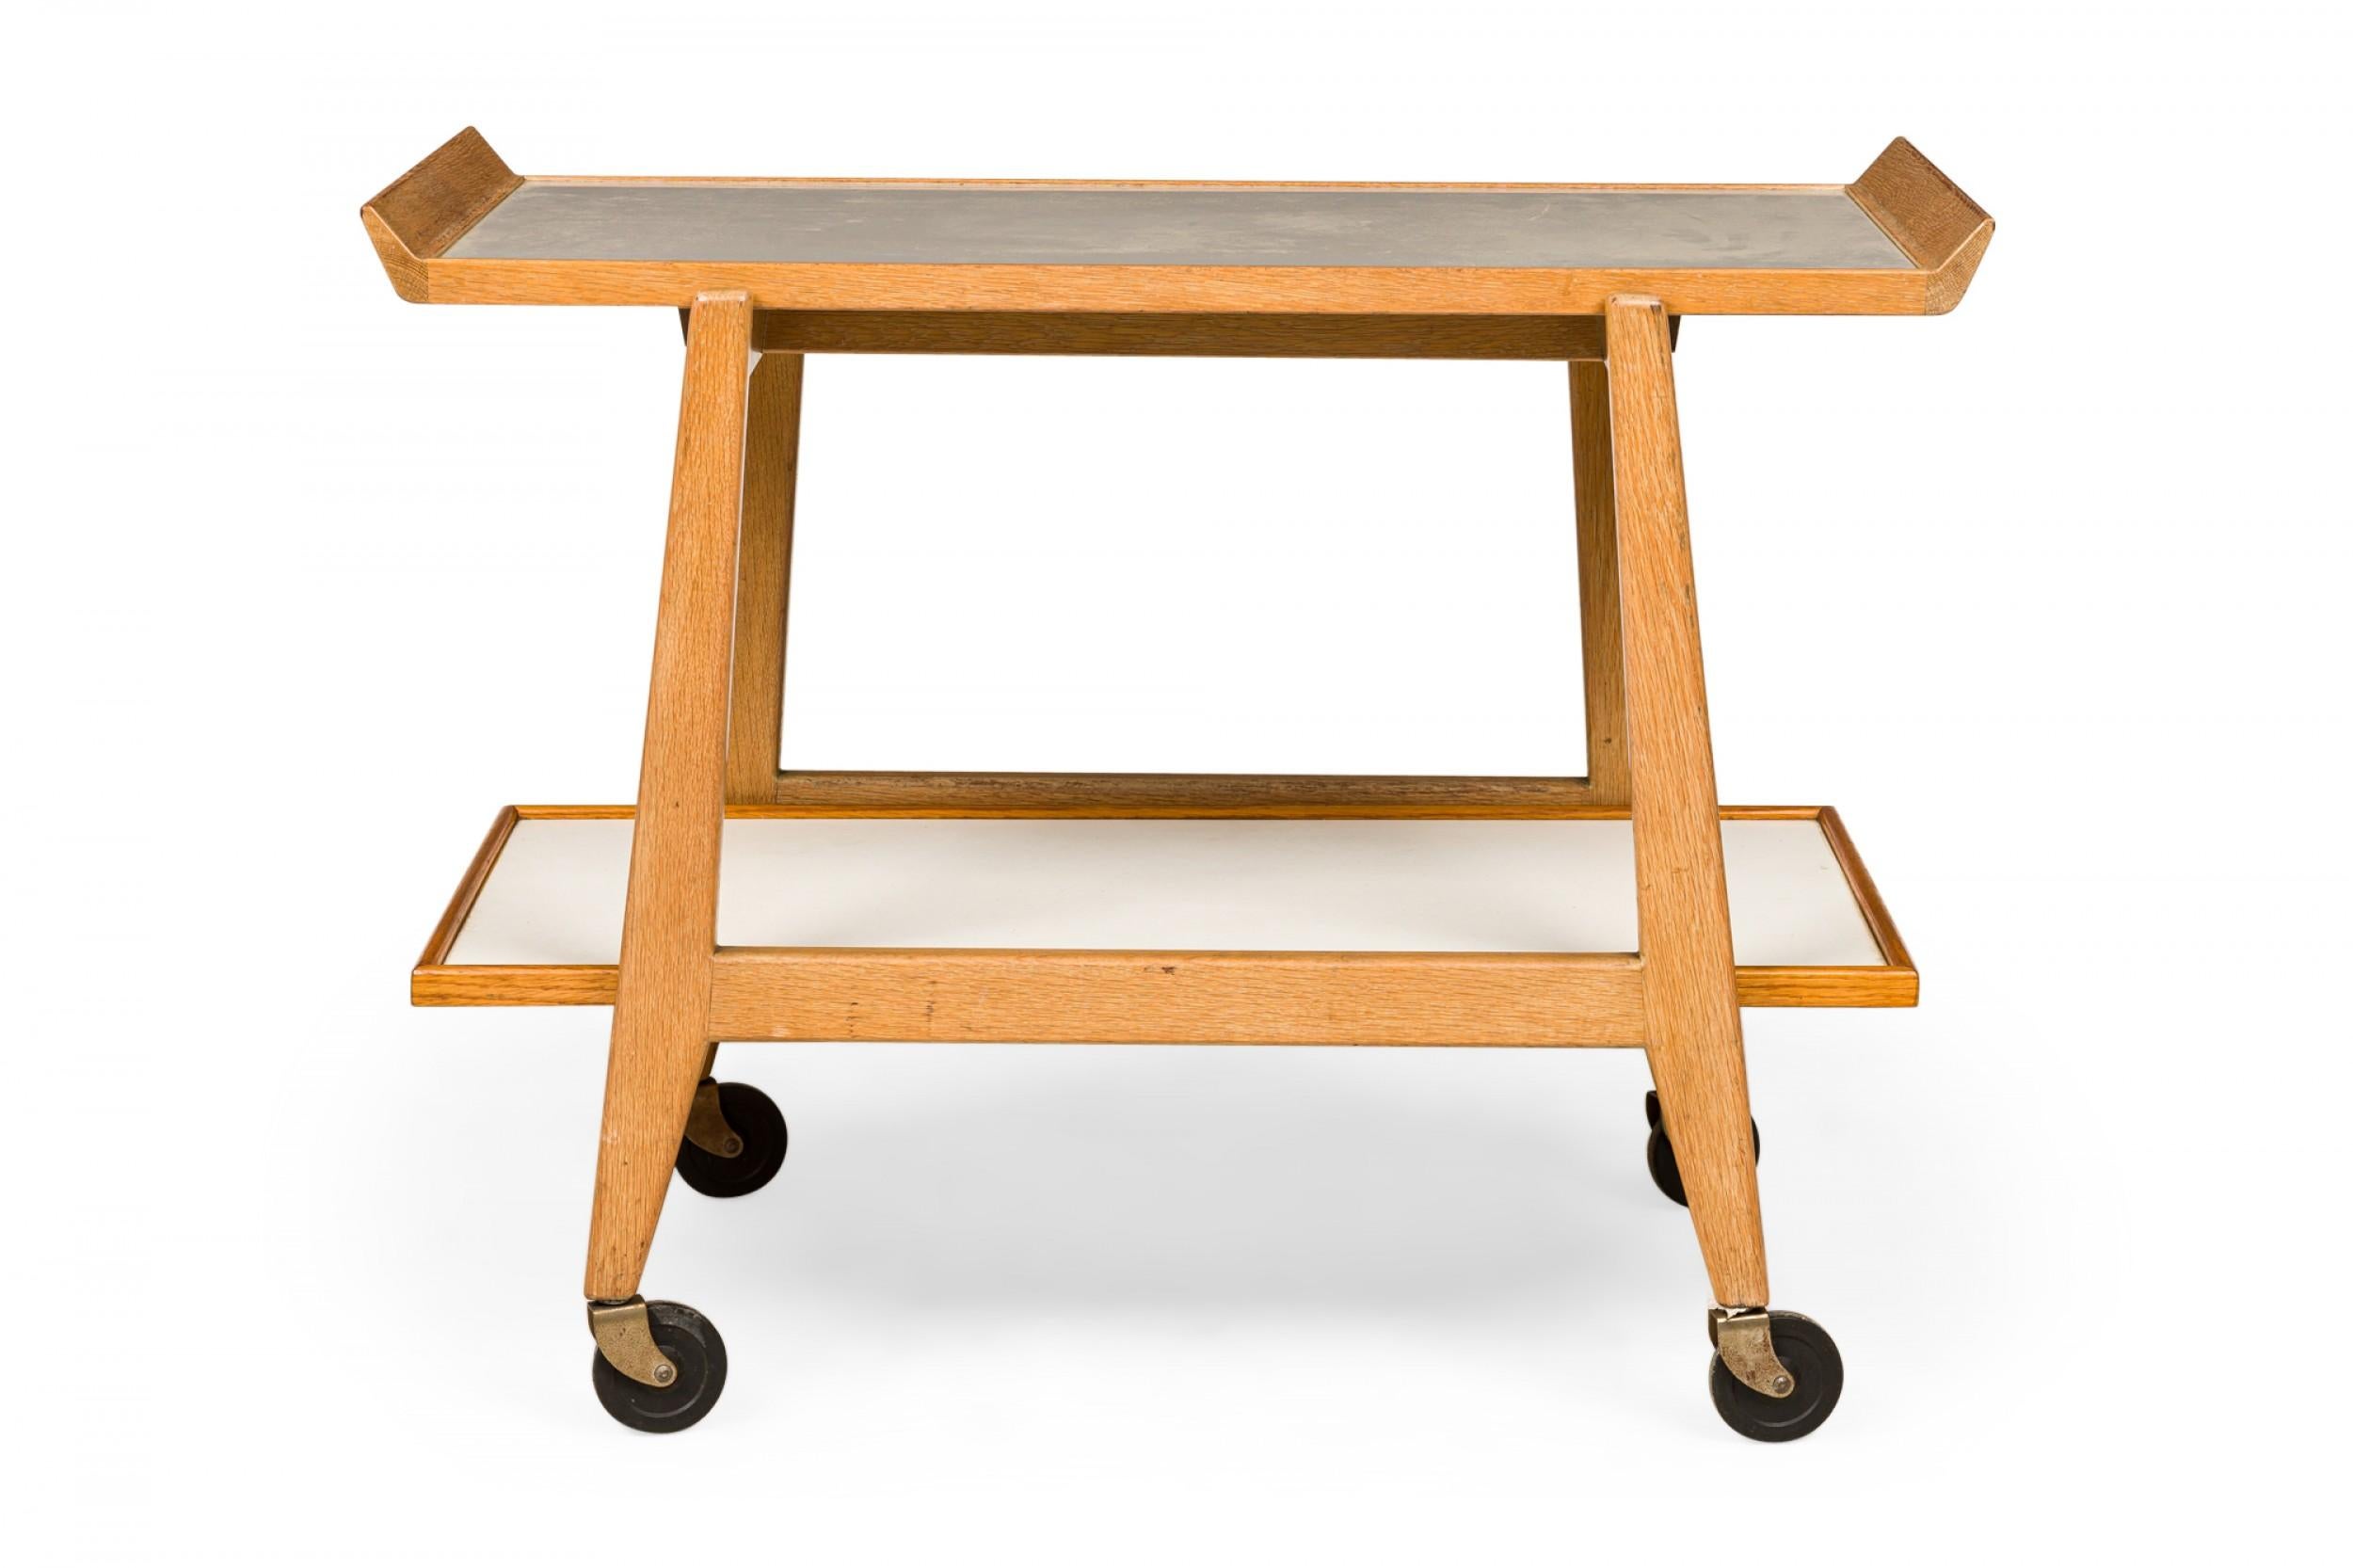 Danish Mid-Century two-tier serving trolley with an oak frame, light gray laminate shelf surfaces, and a removable tray top, resting on four casters. (JENS RISOM)
